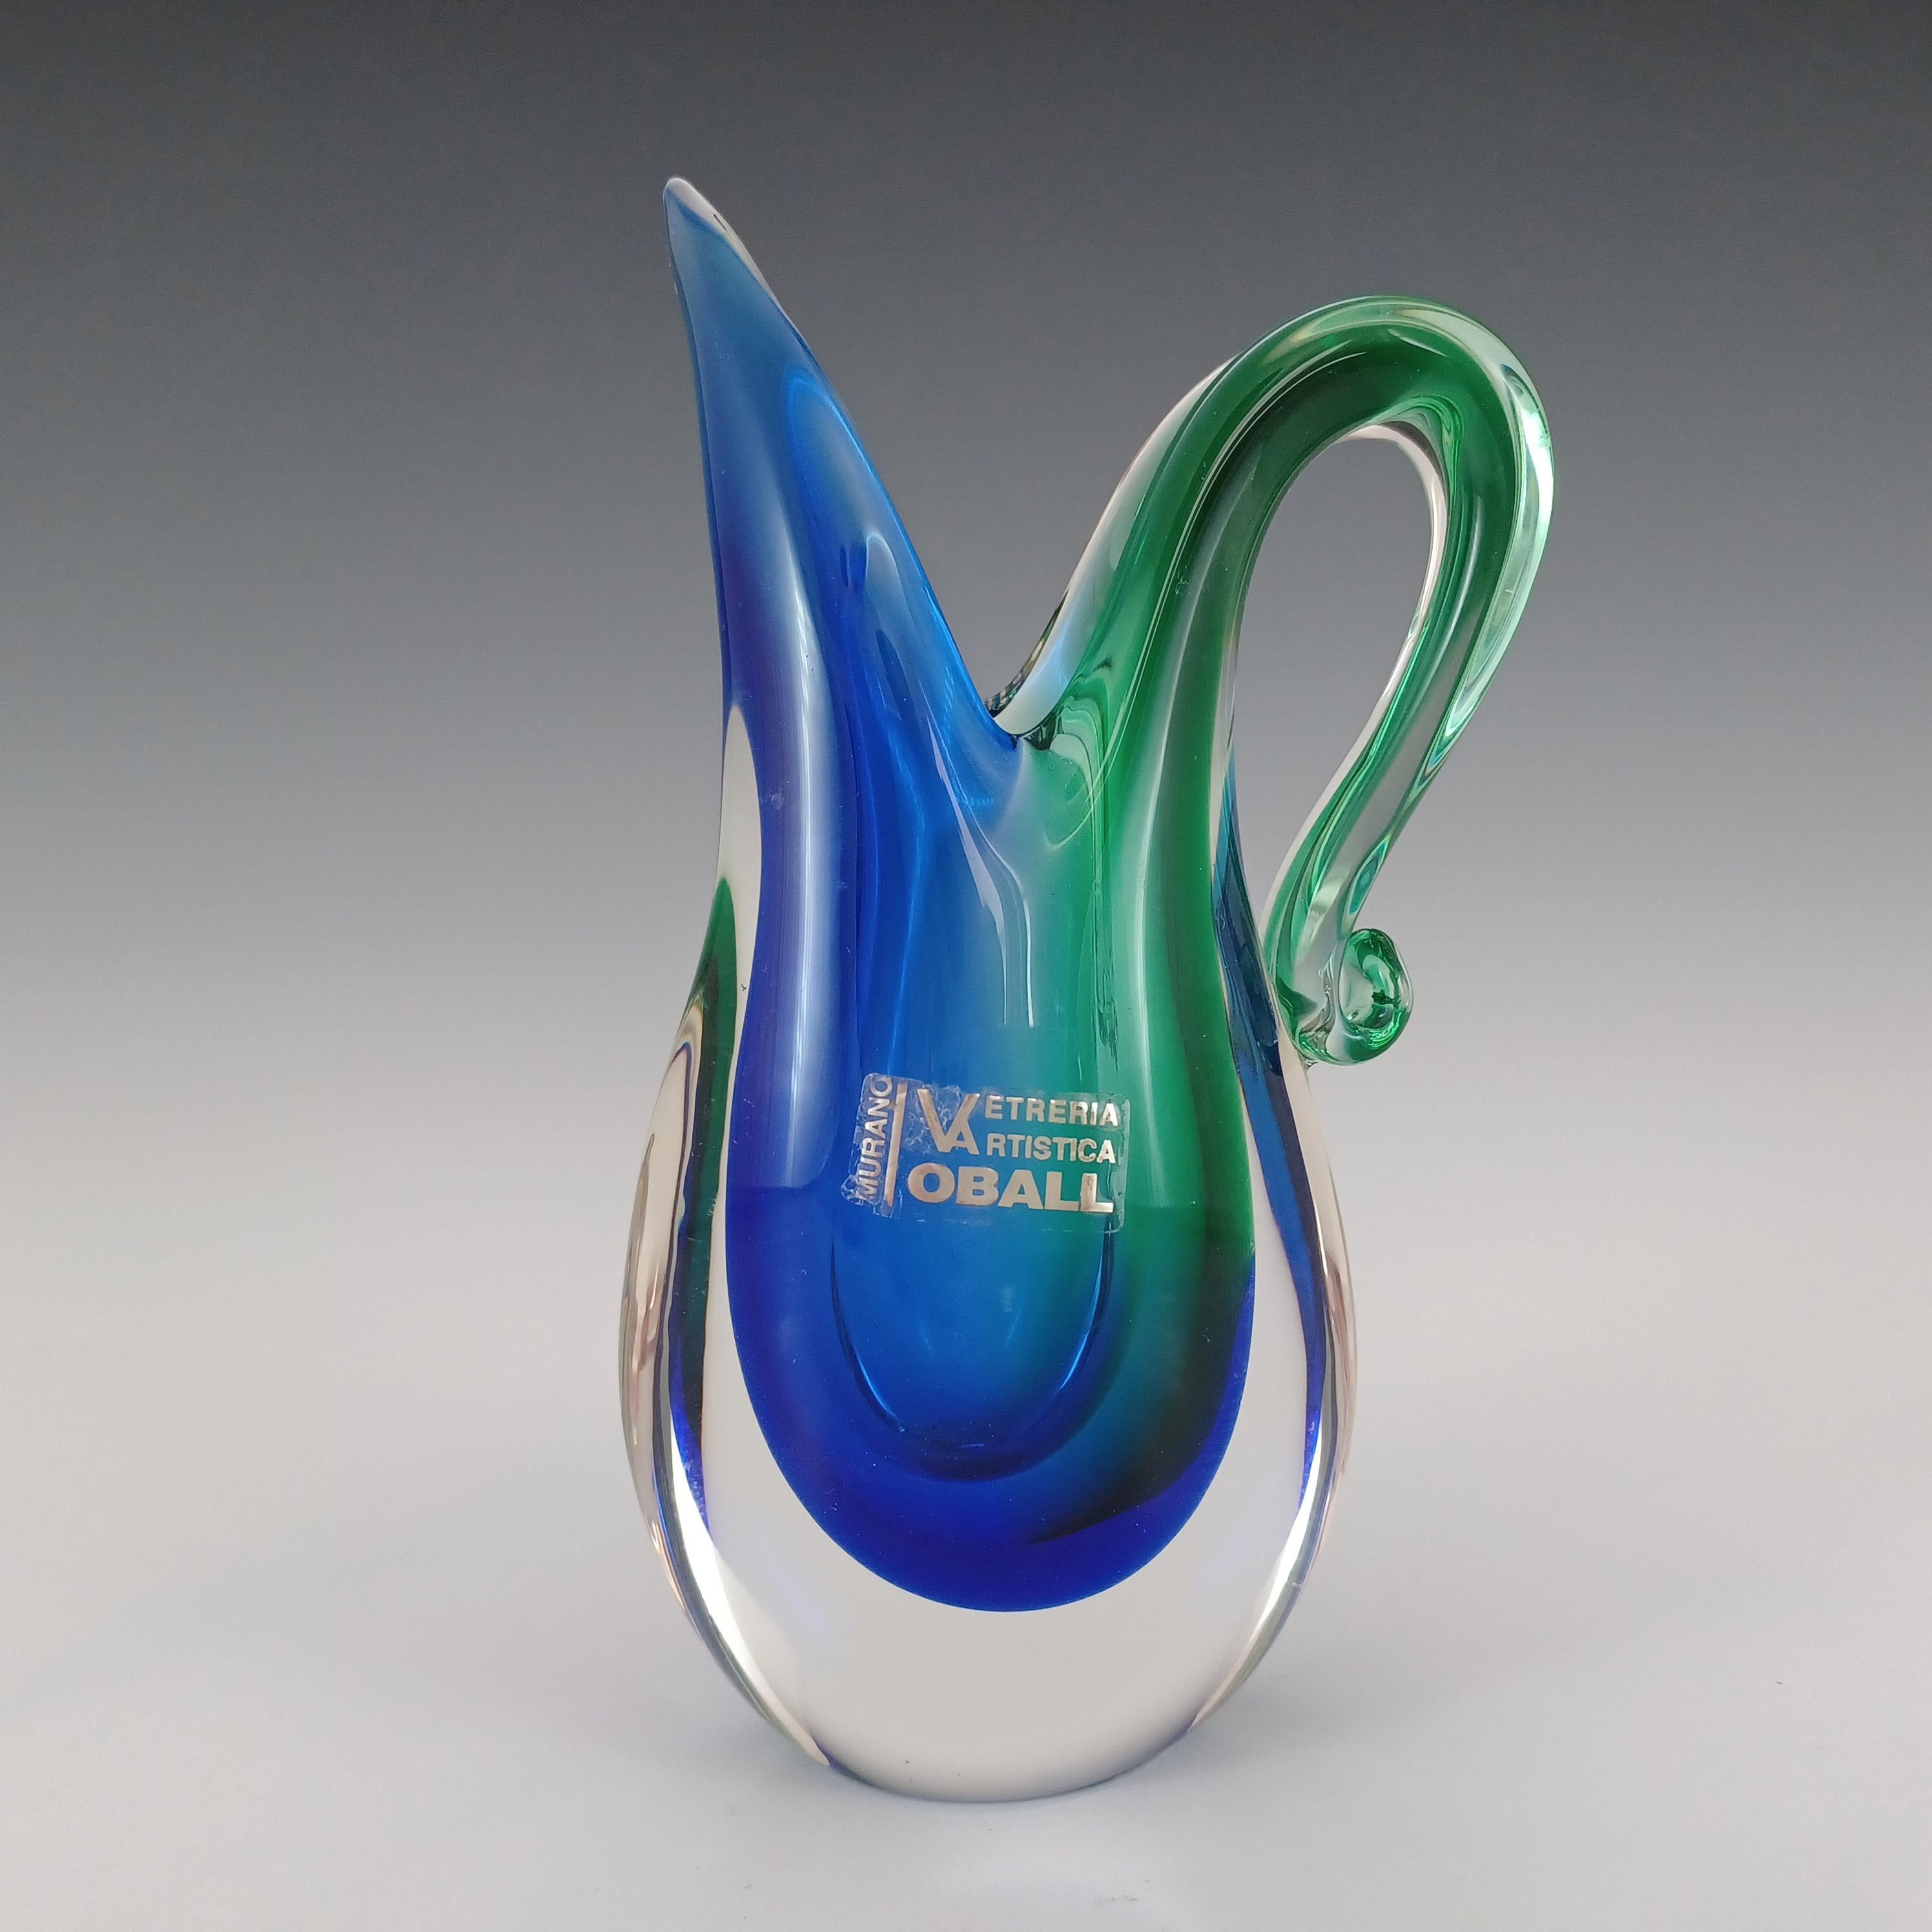 Here is a wonderful Venetian glass organic shaped vase. Made on the island of Murano, near Venice, Italy, by the Oball glassworks, labelled. In a stunning combination of blue and green glass encased in clear glass, using the renowned Venetian